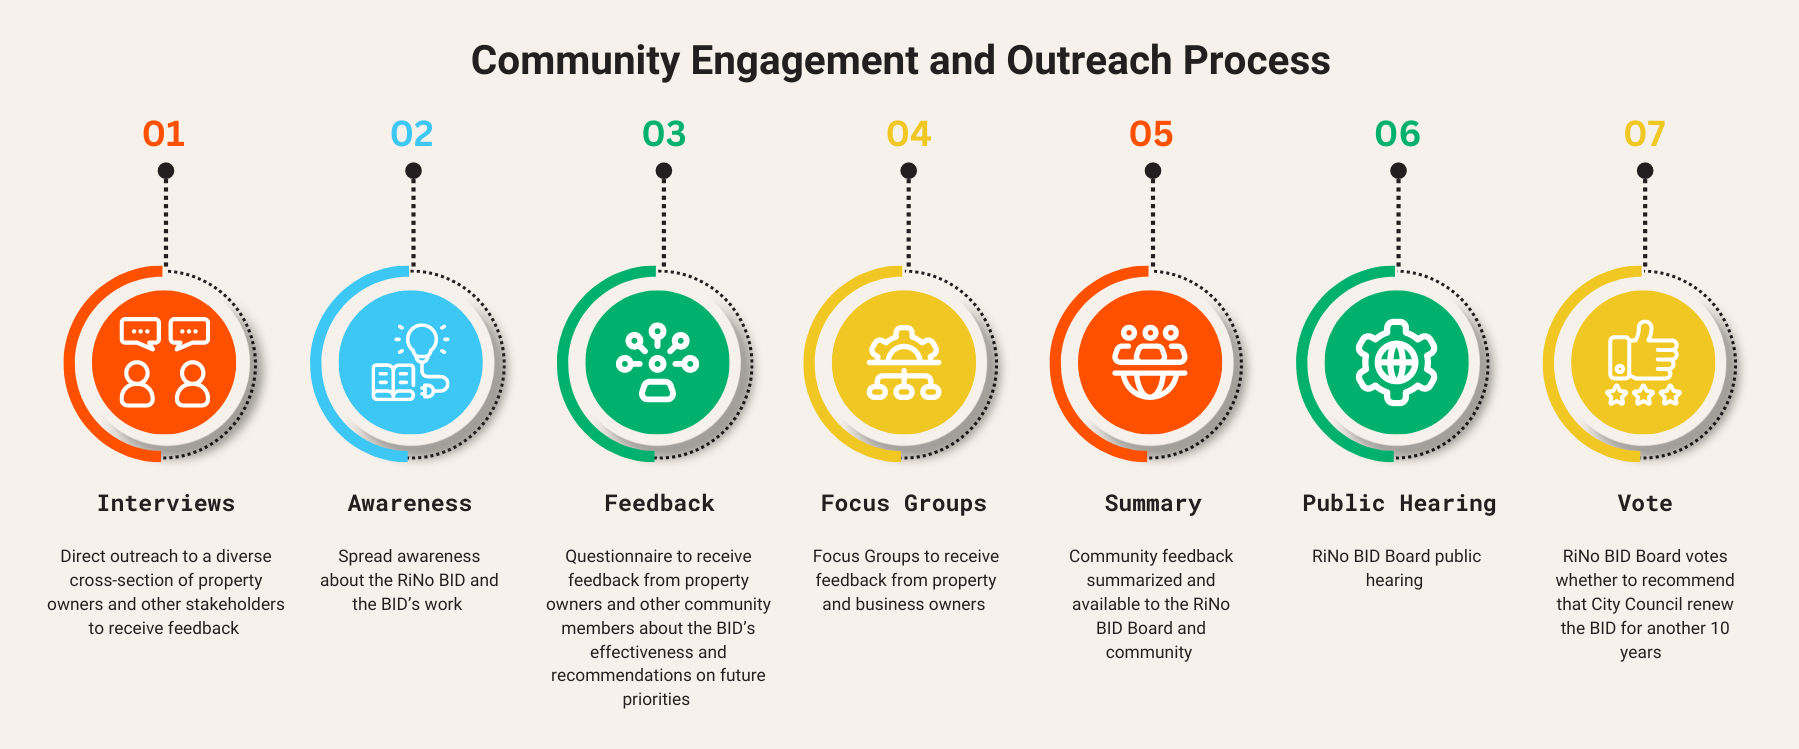 Community Engagement and Outreach Process Graphic